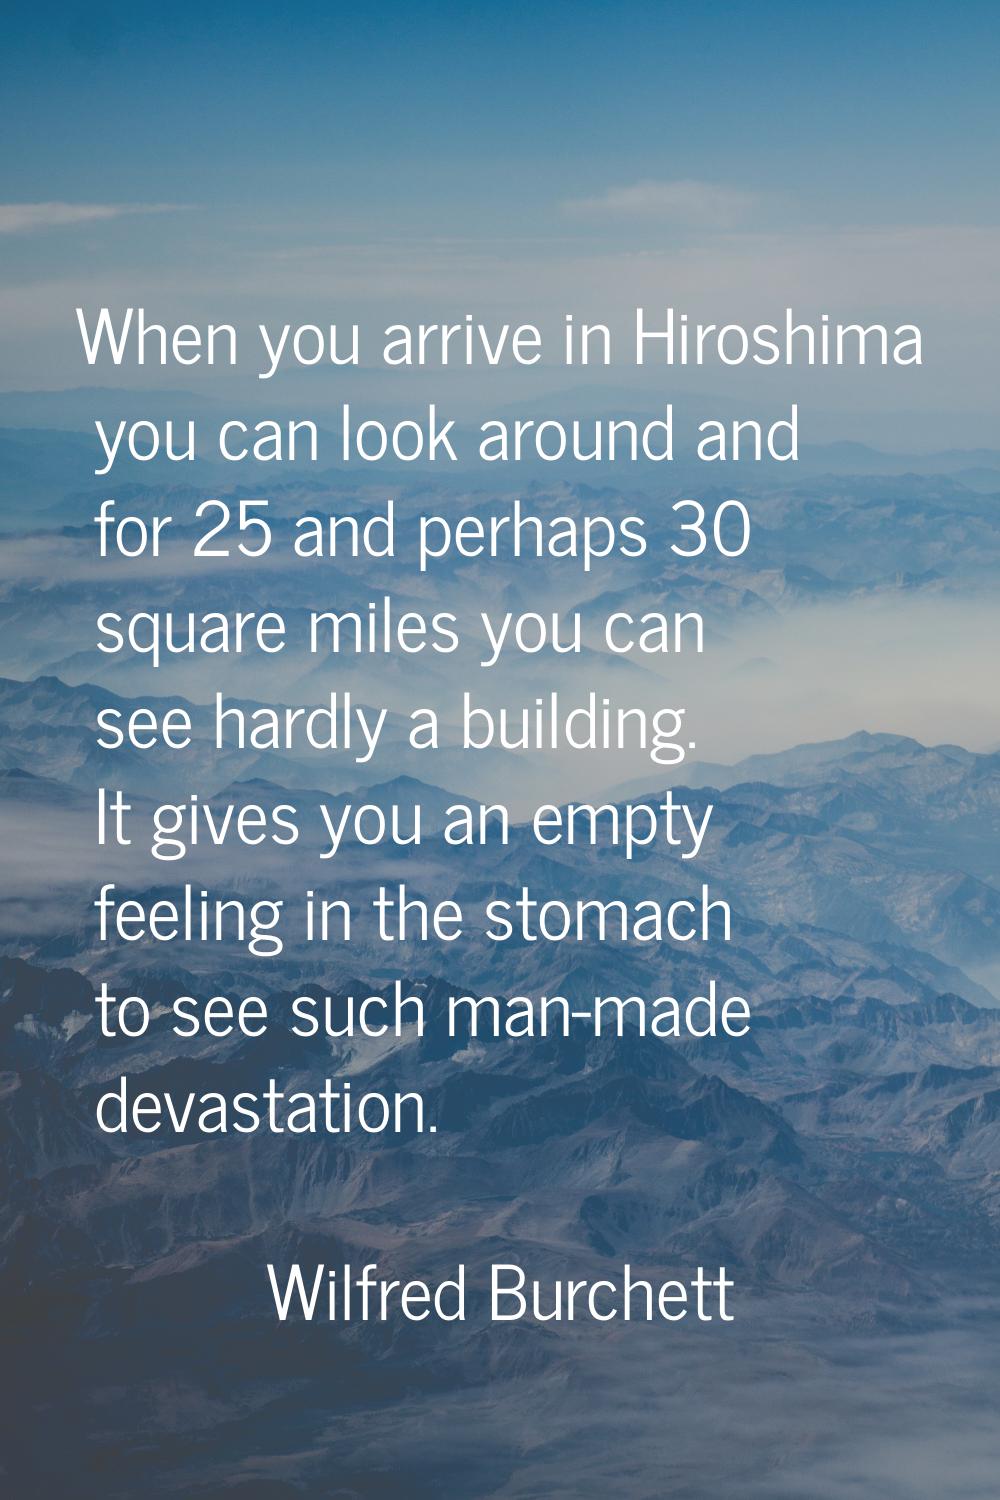 When you arrive in Hiroshima you can look around and for 25 and perhaps 30 square miles you can see